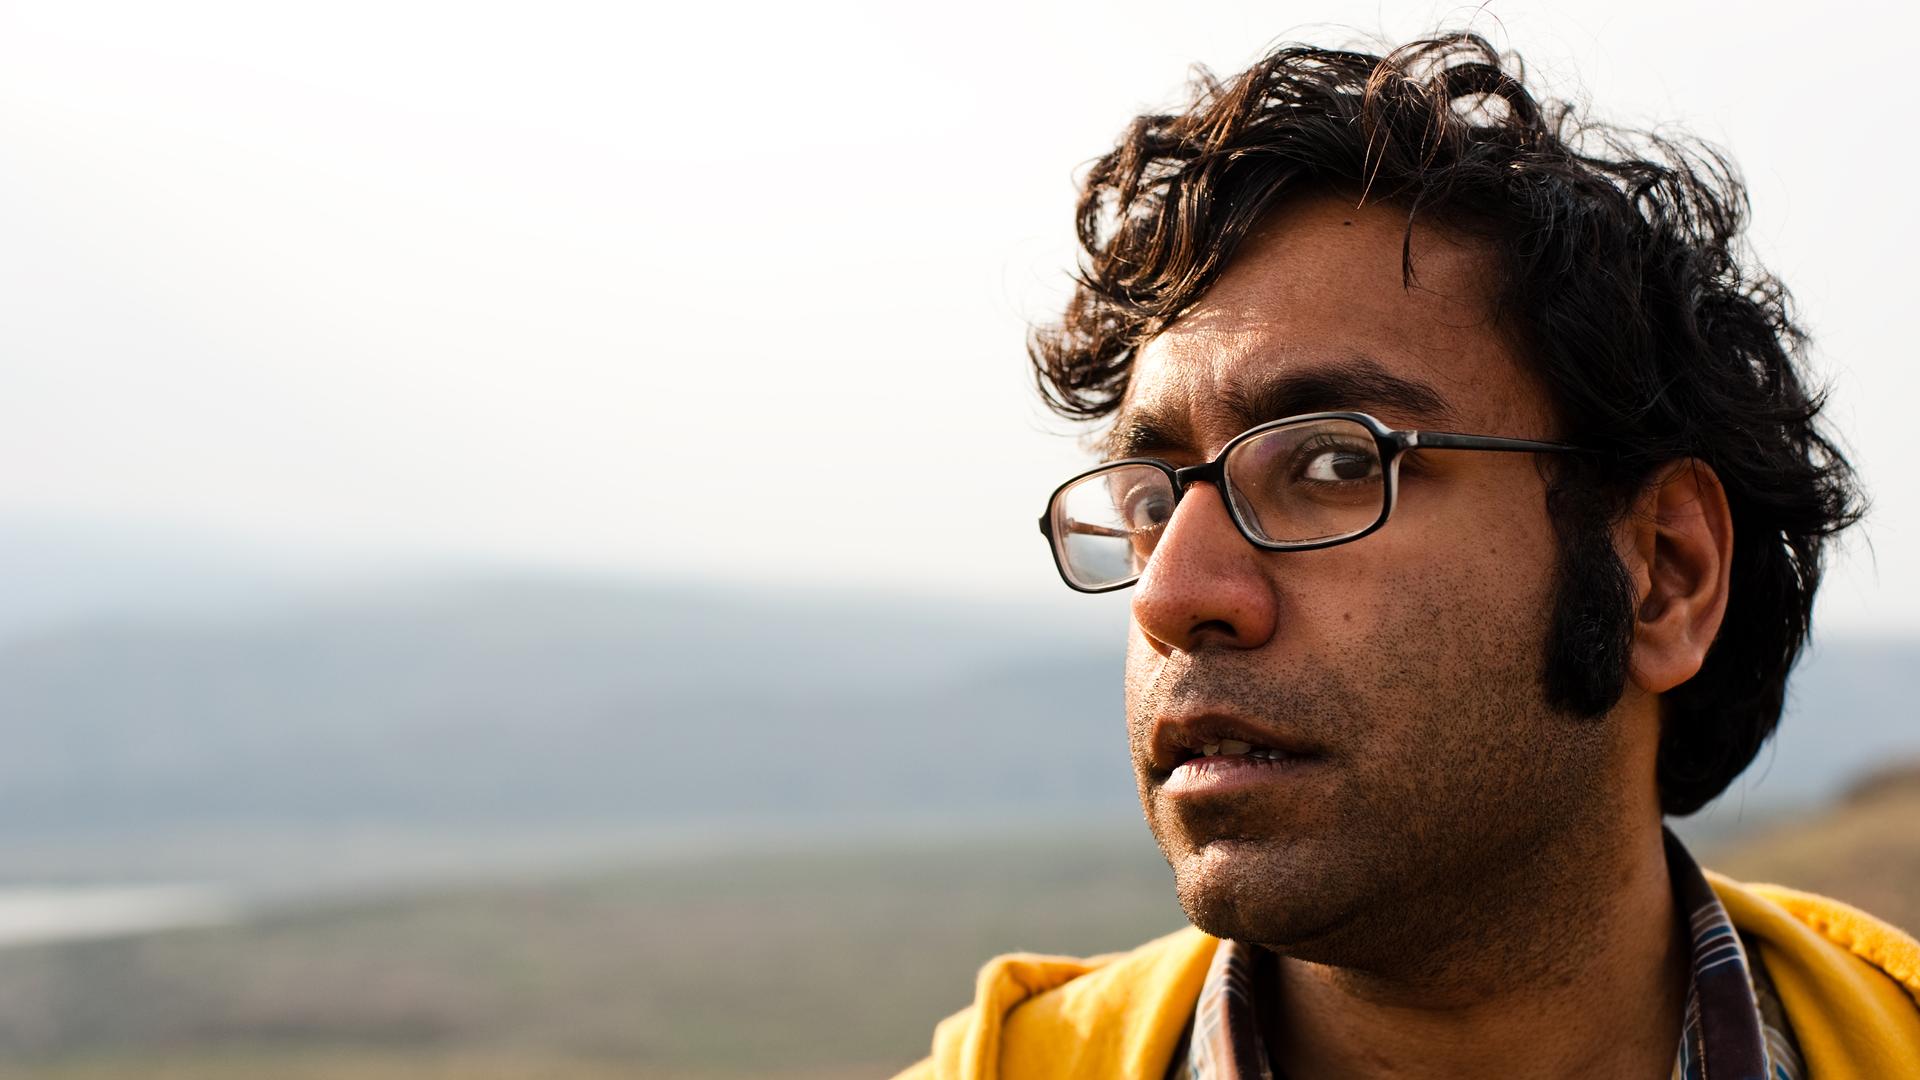 Comedian Hari Kondabolu recently released his first comedy album "Waiting for 2042," referring to the year the US Census estimates the country will be a majority-minority nation.